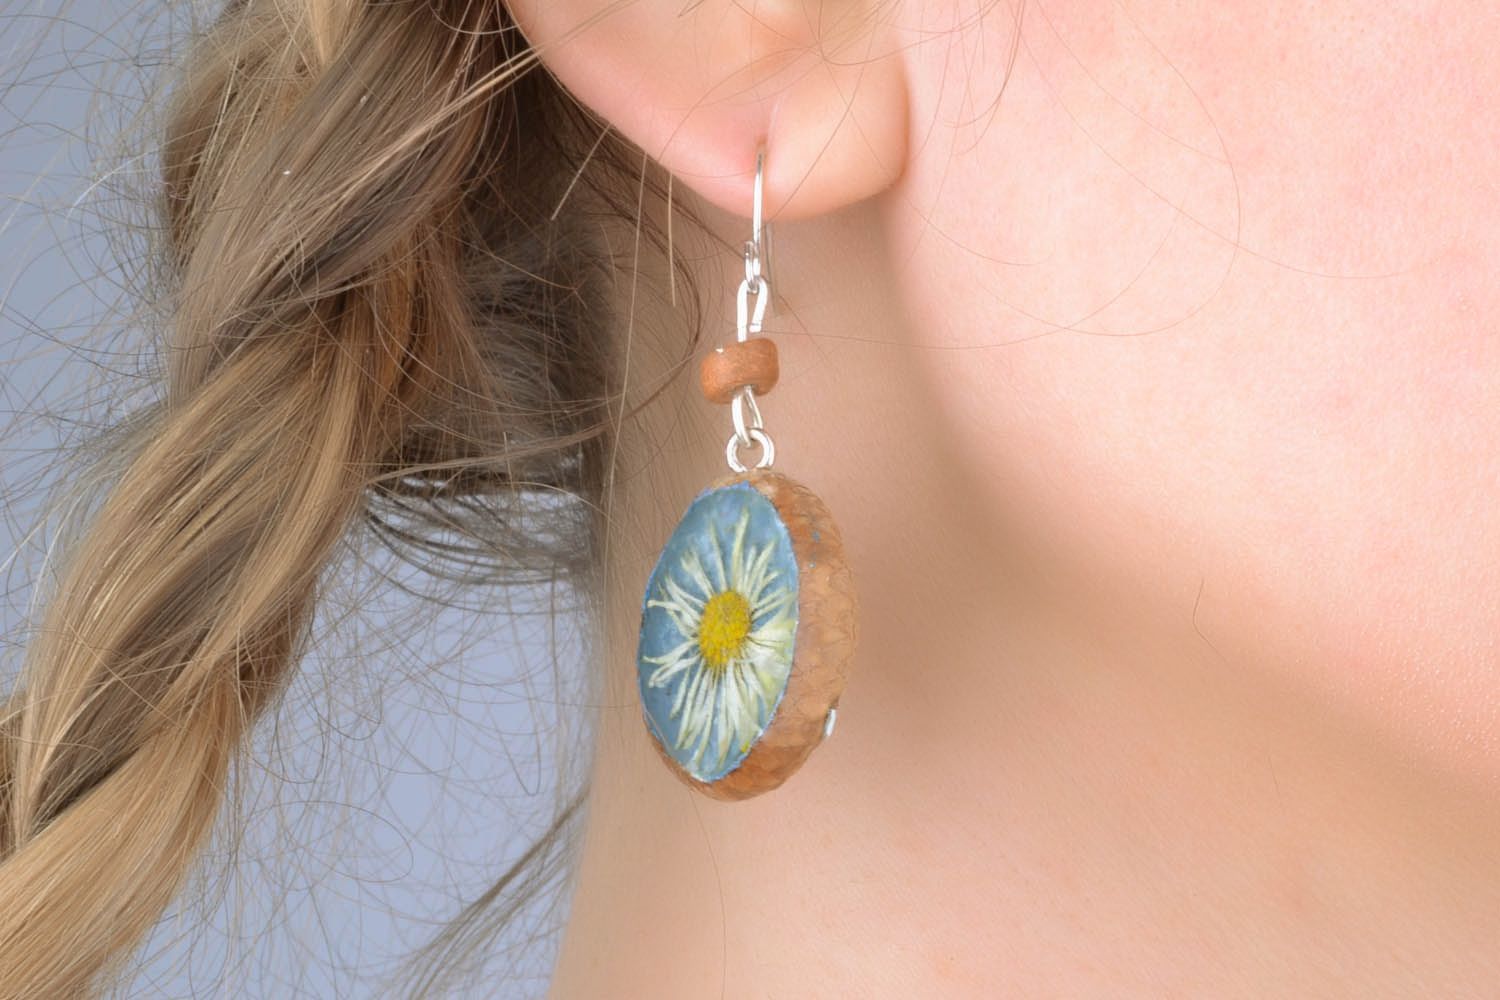 Earrings made of acorns and daisies photo 1